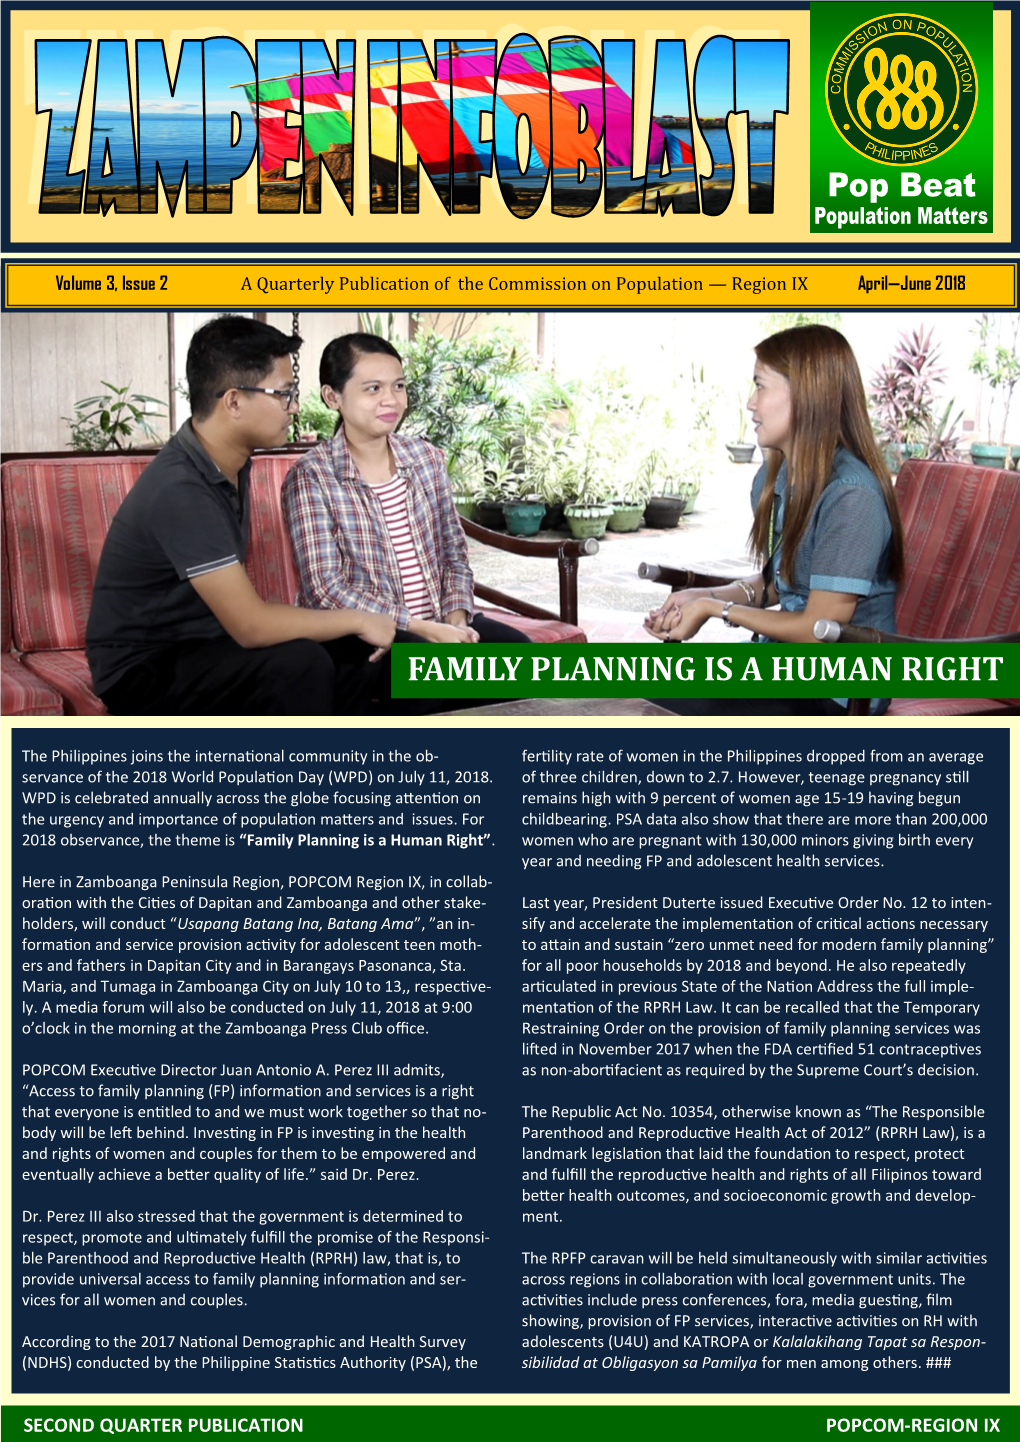 Family Planning Is a Human Right